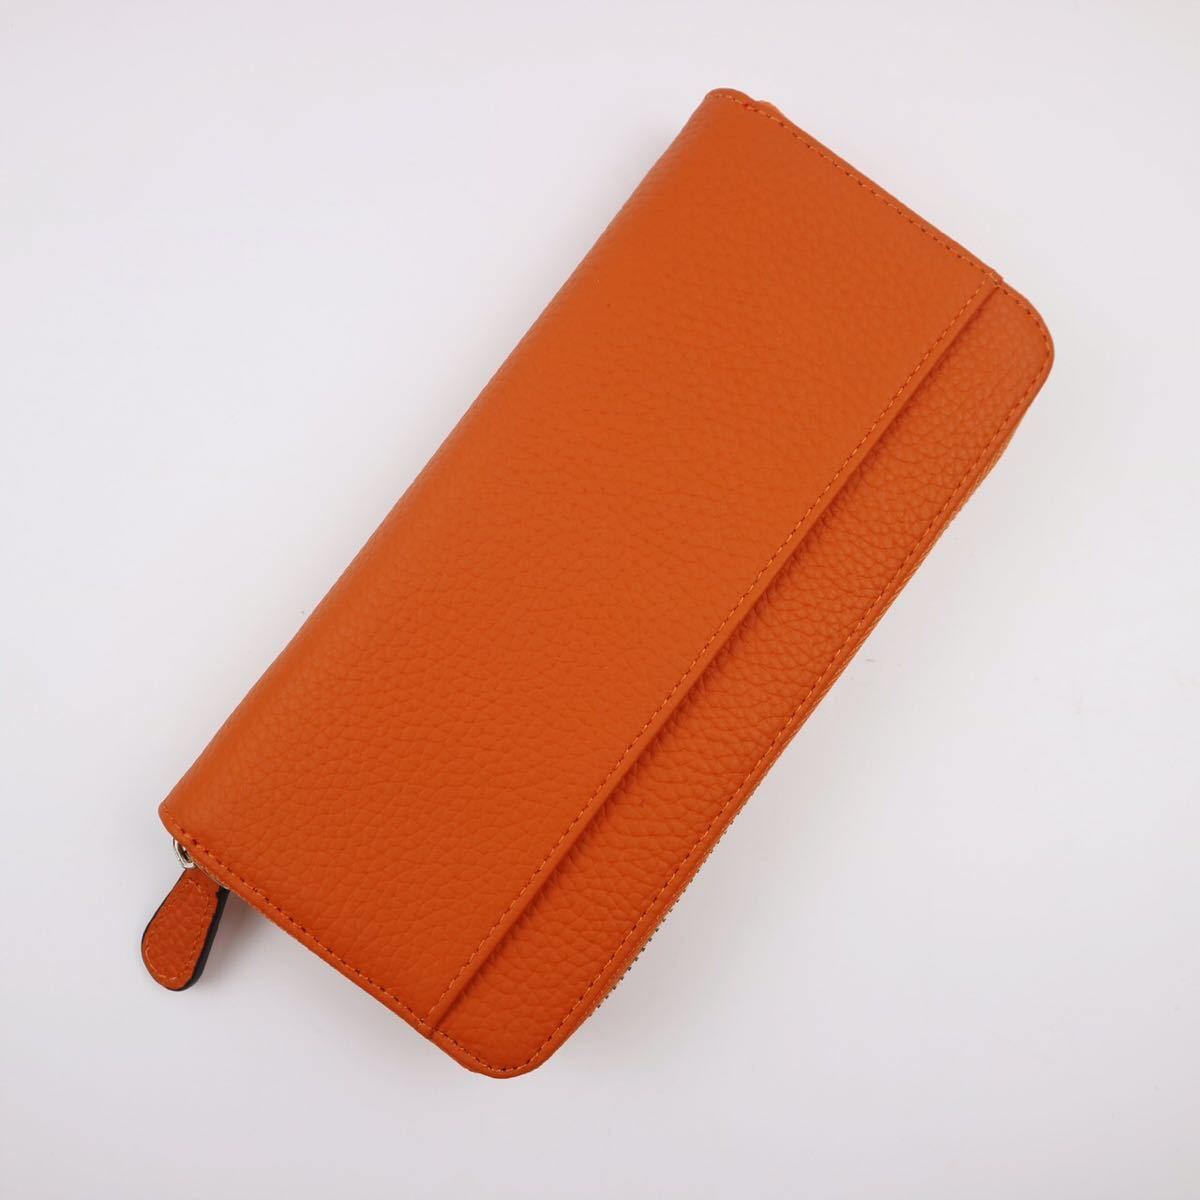  new work goods orange series Italian leather cow leather original leather long wallet & great popularity commodity // man and woman use 